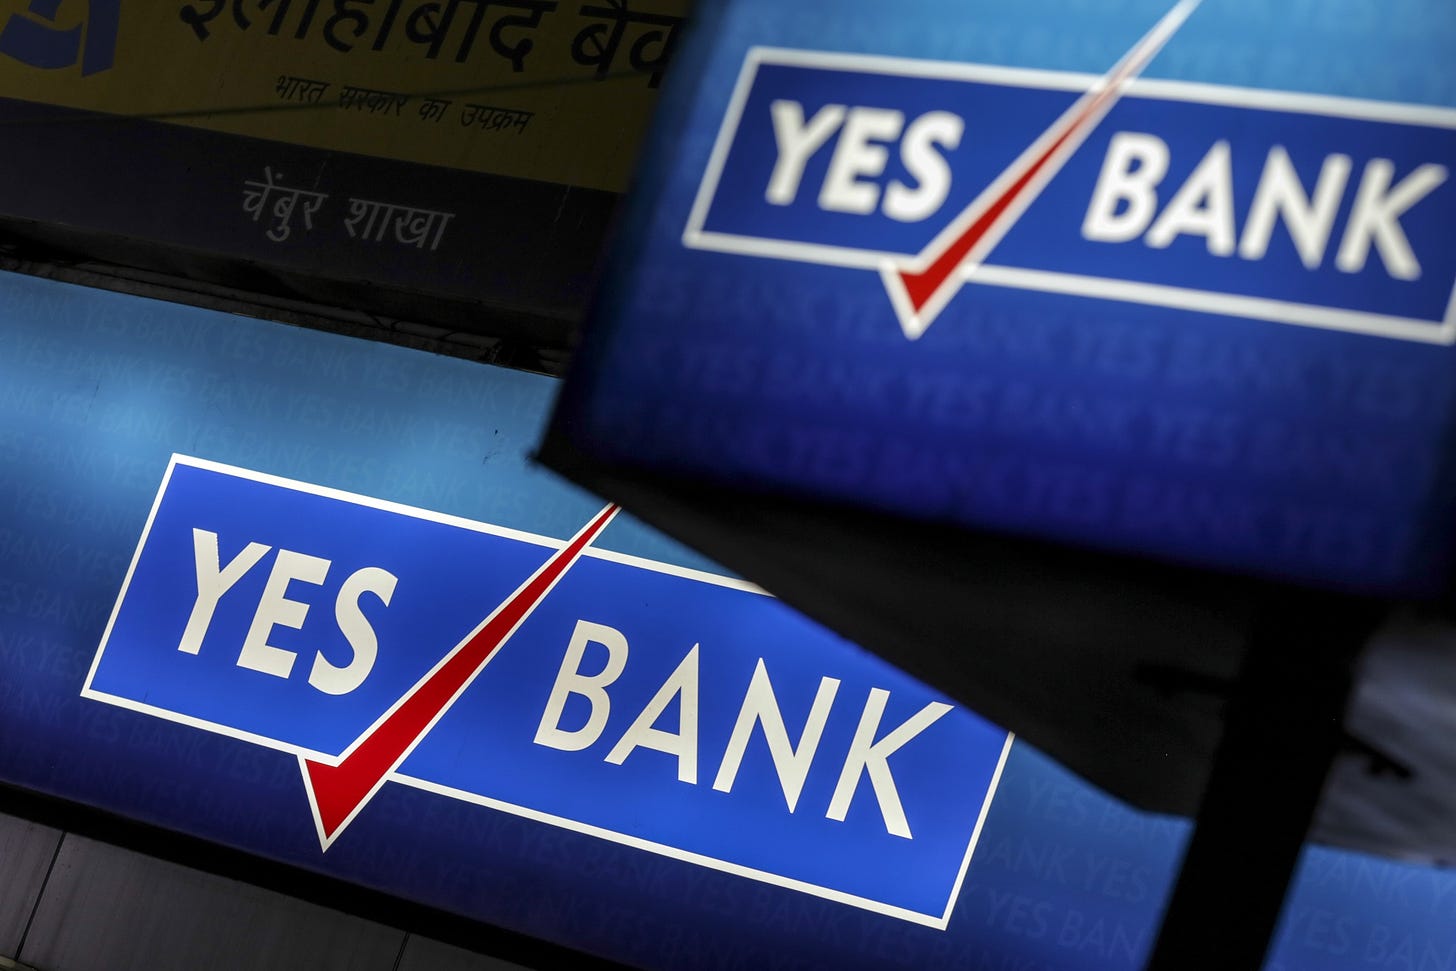 Yes Bank Said to Plan $1 Billion Share Sale in Public Offering - Bloomberg